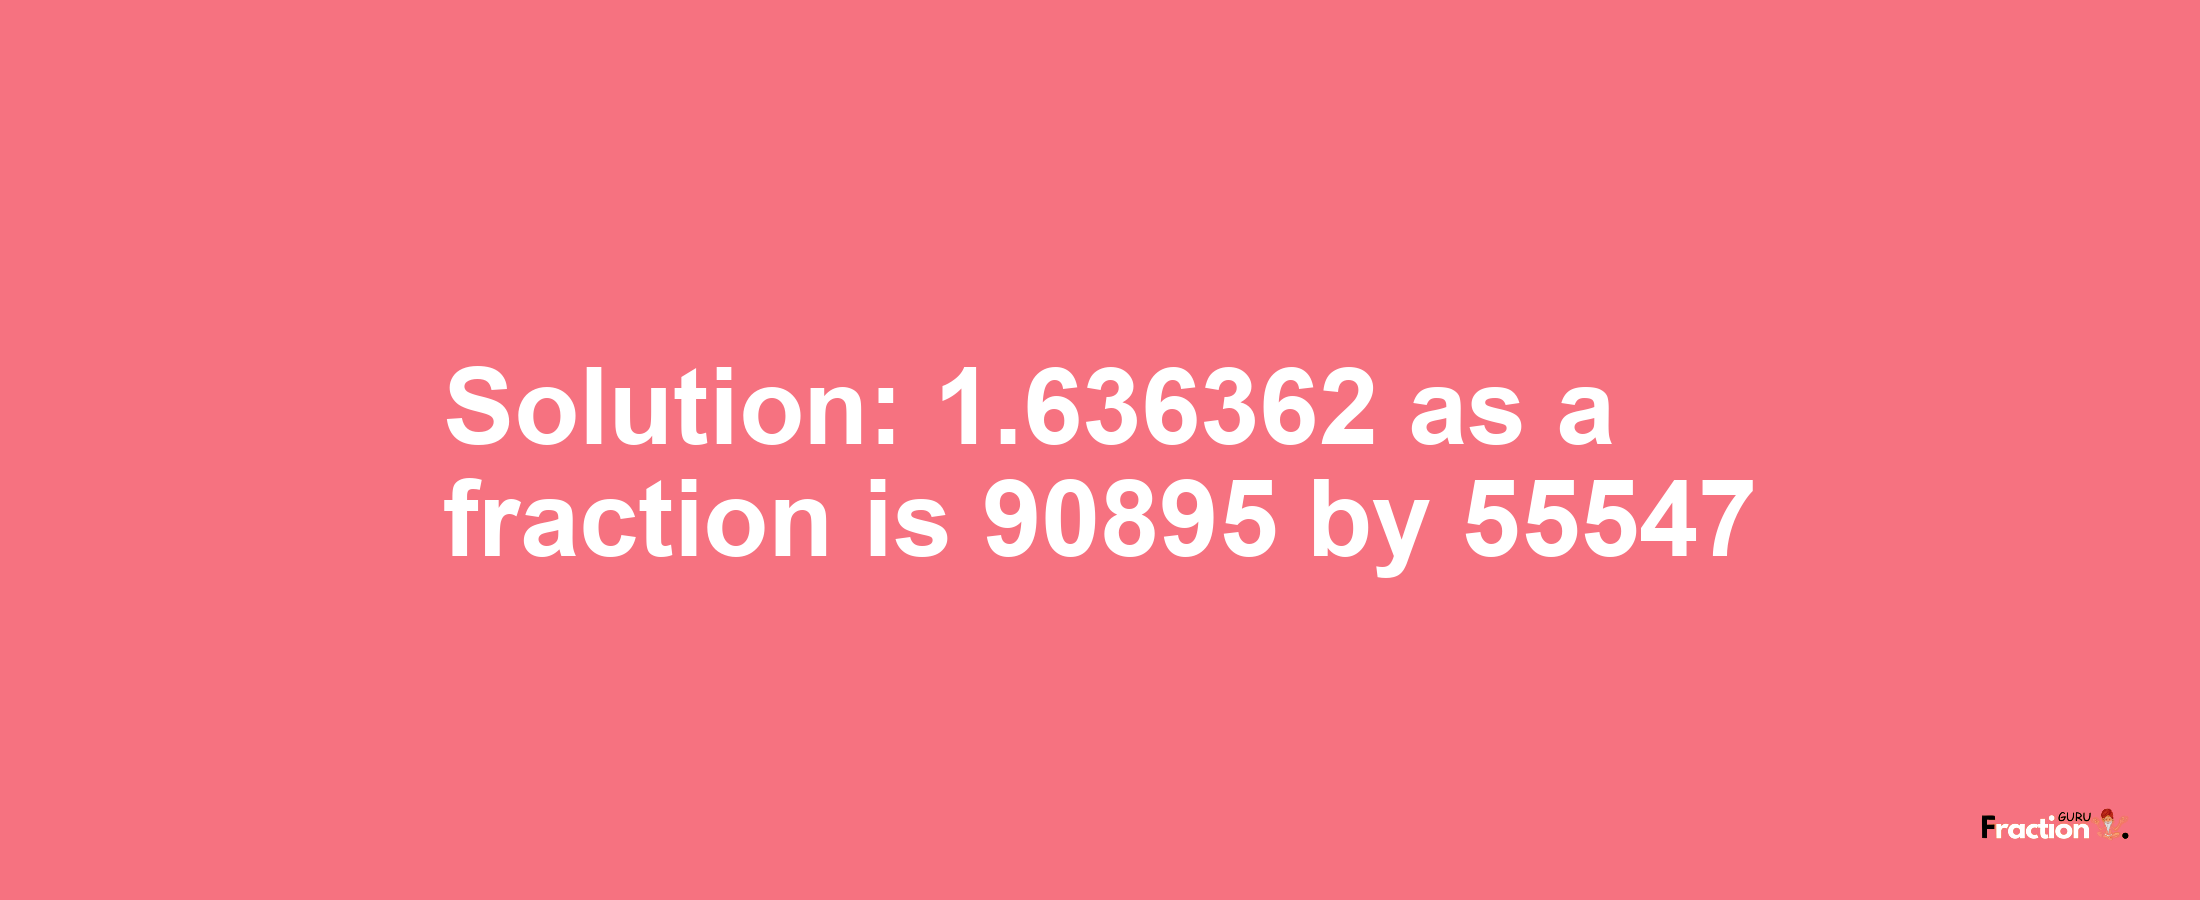 Solution:1.636362 as a fraction is 90895/55547